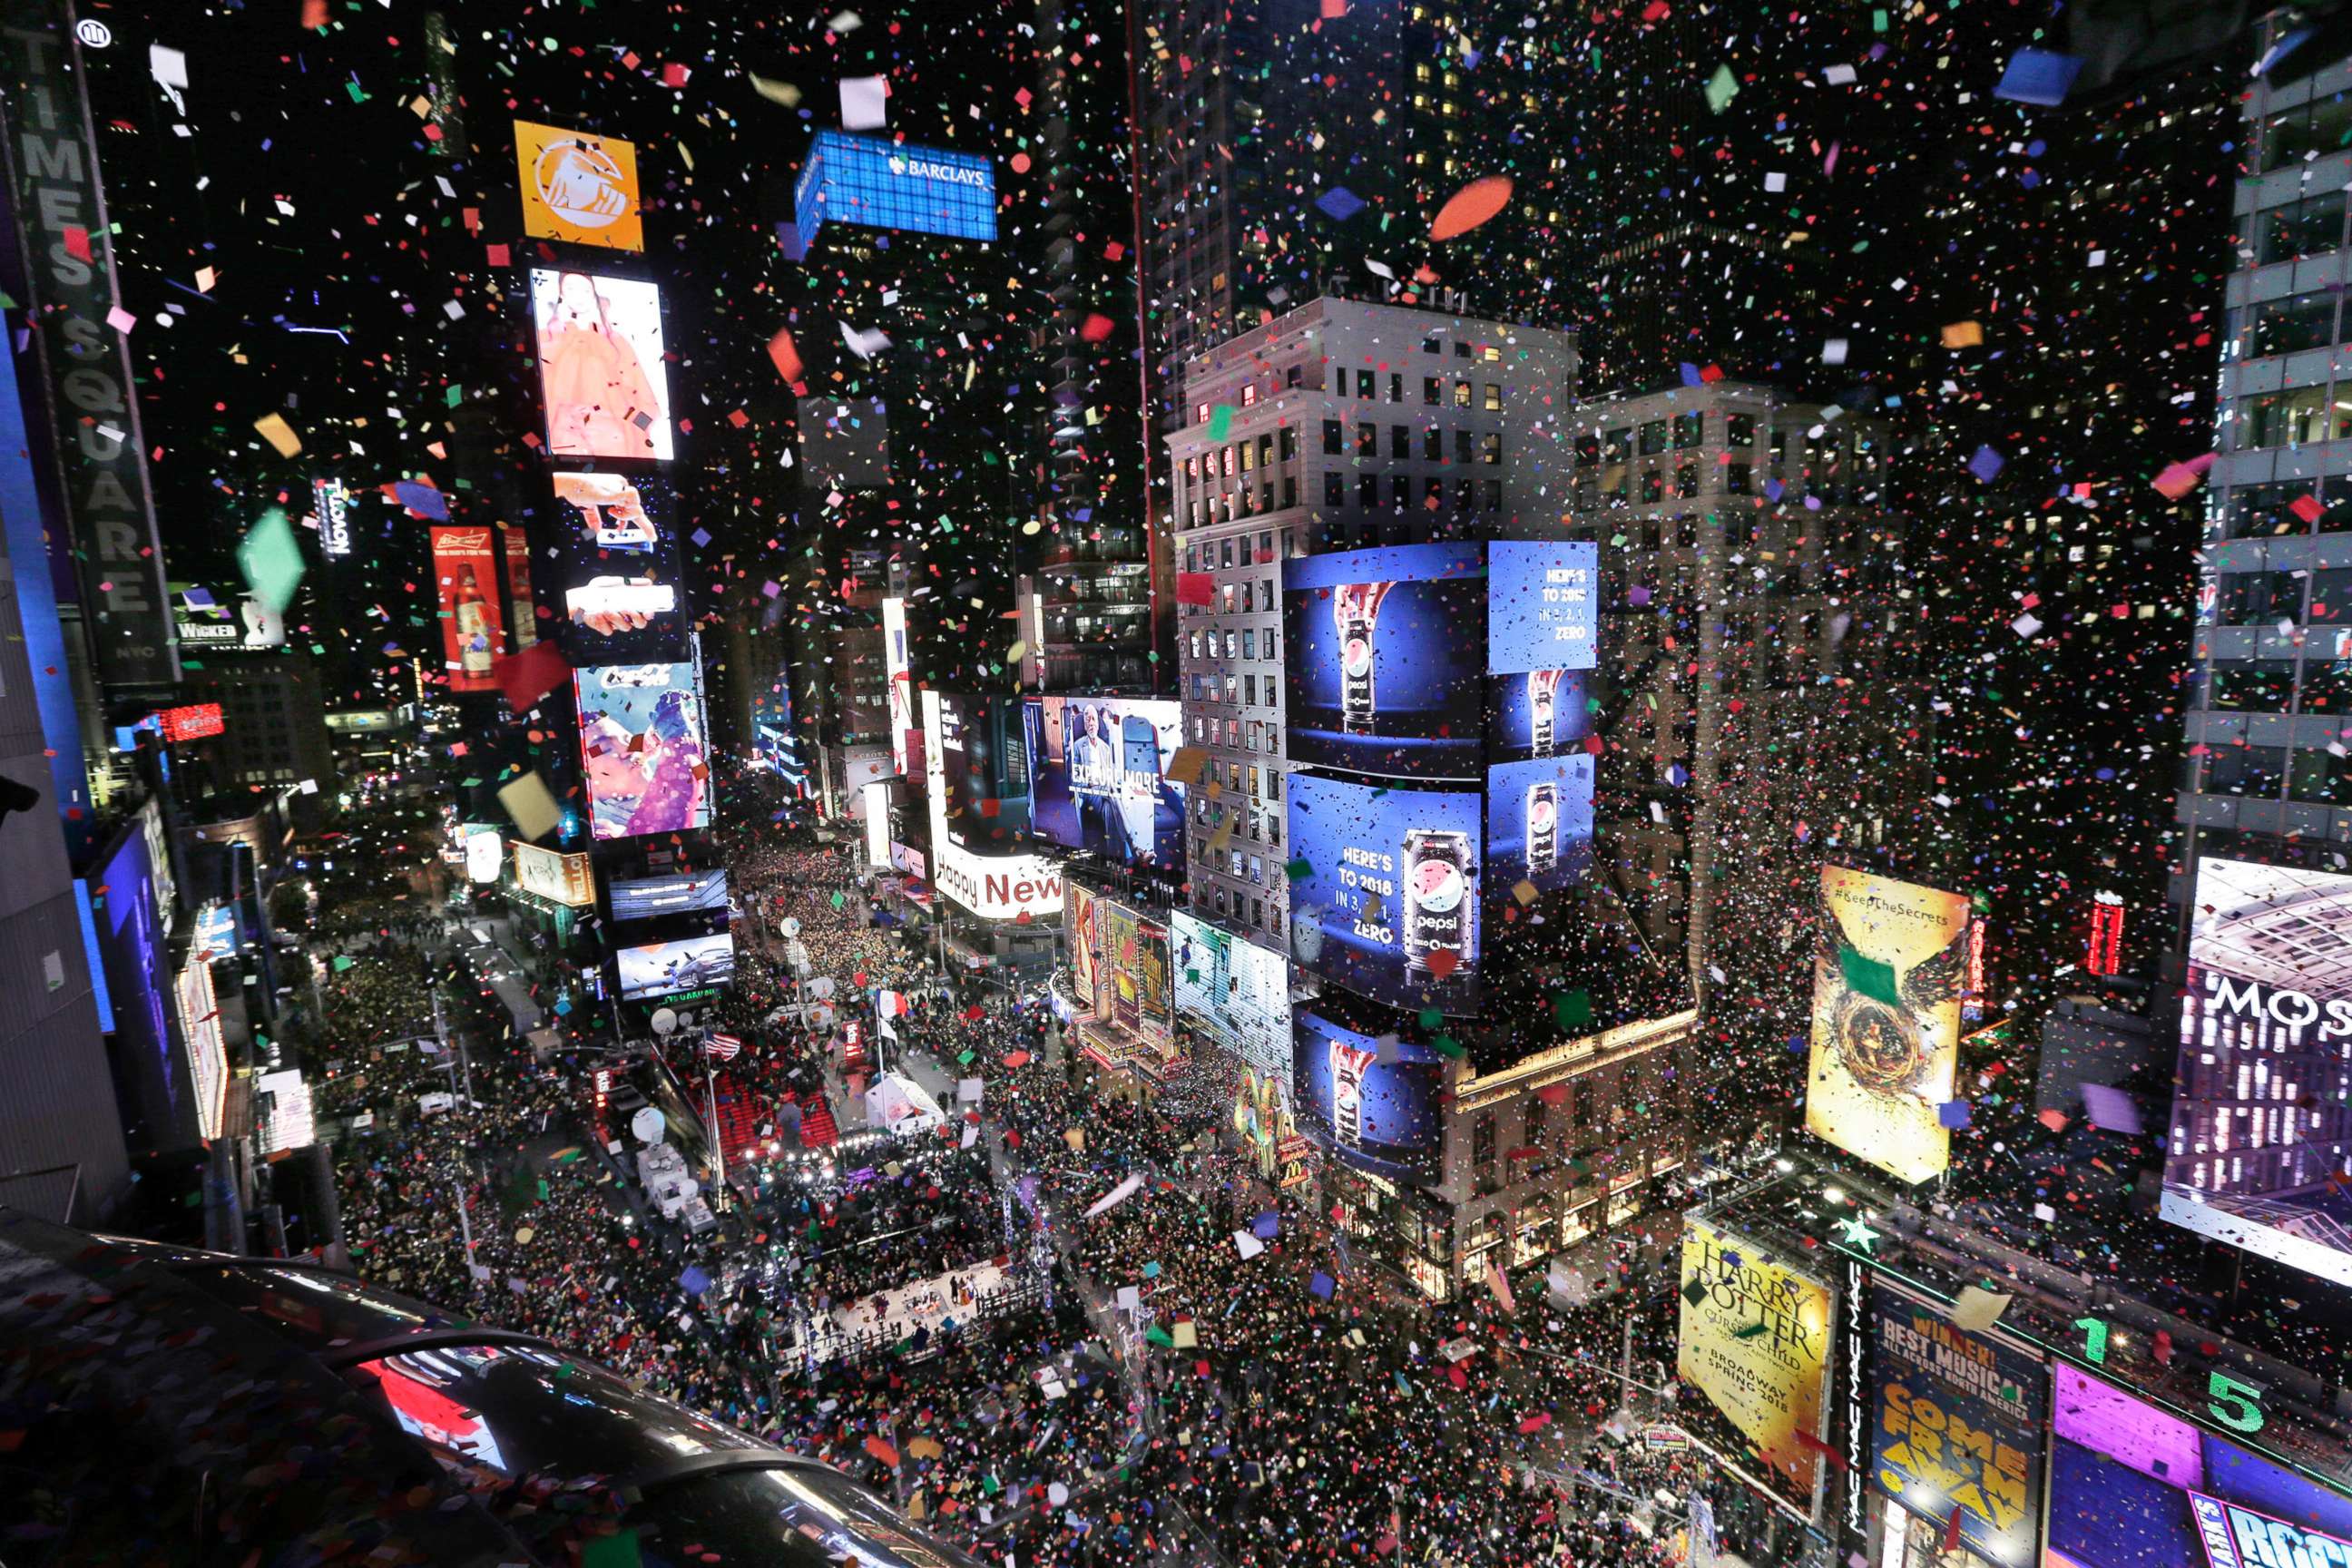 PHOTO: Confetti drops over the crowd as the clock strikes midnight during the New Year's celebration in Times Square, New York, Jan. 1, 2018. 